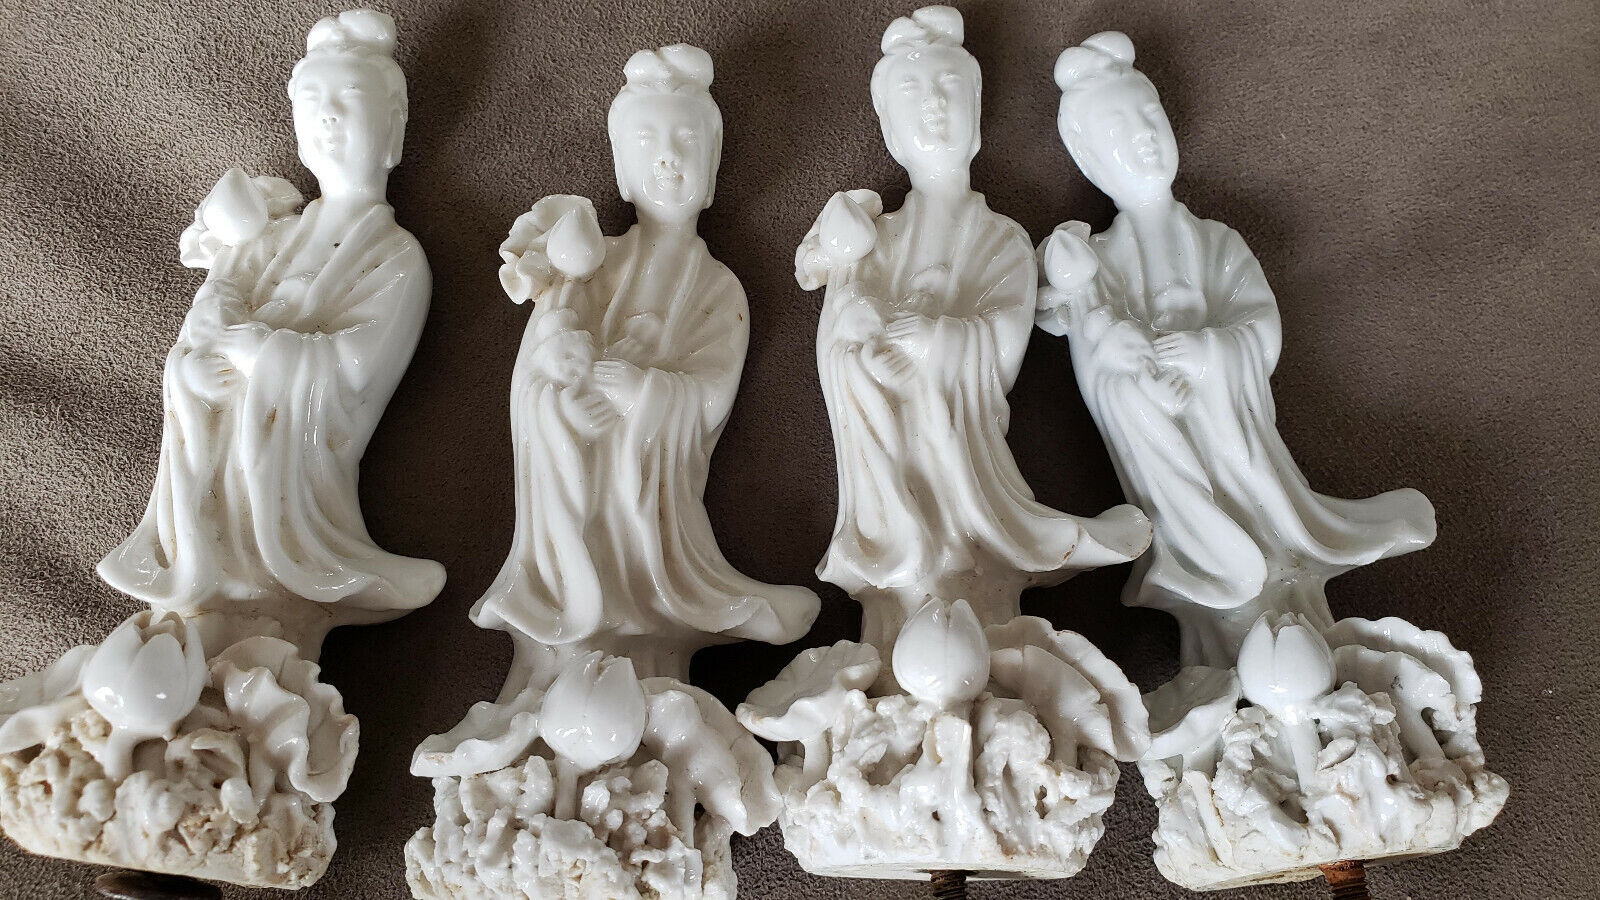 Four Rare Antique Blanc de Chine Chinese Guanyin Figurines. 4.25 inches tall. Без бренда